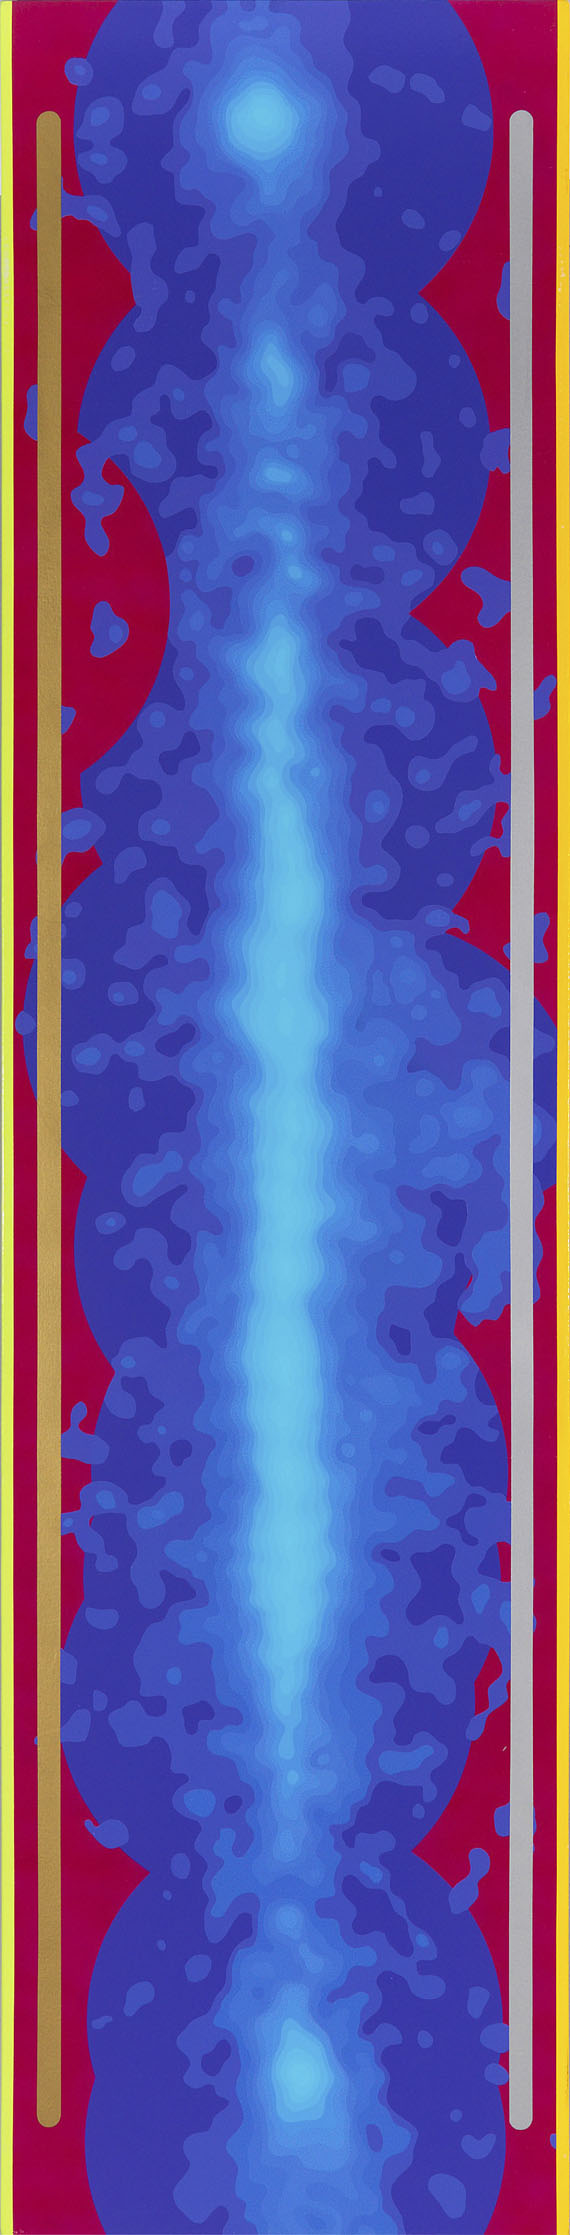 Jack Goldstein - Untitled (tall blue red)